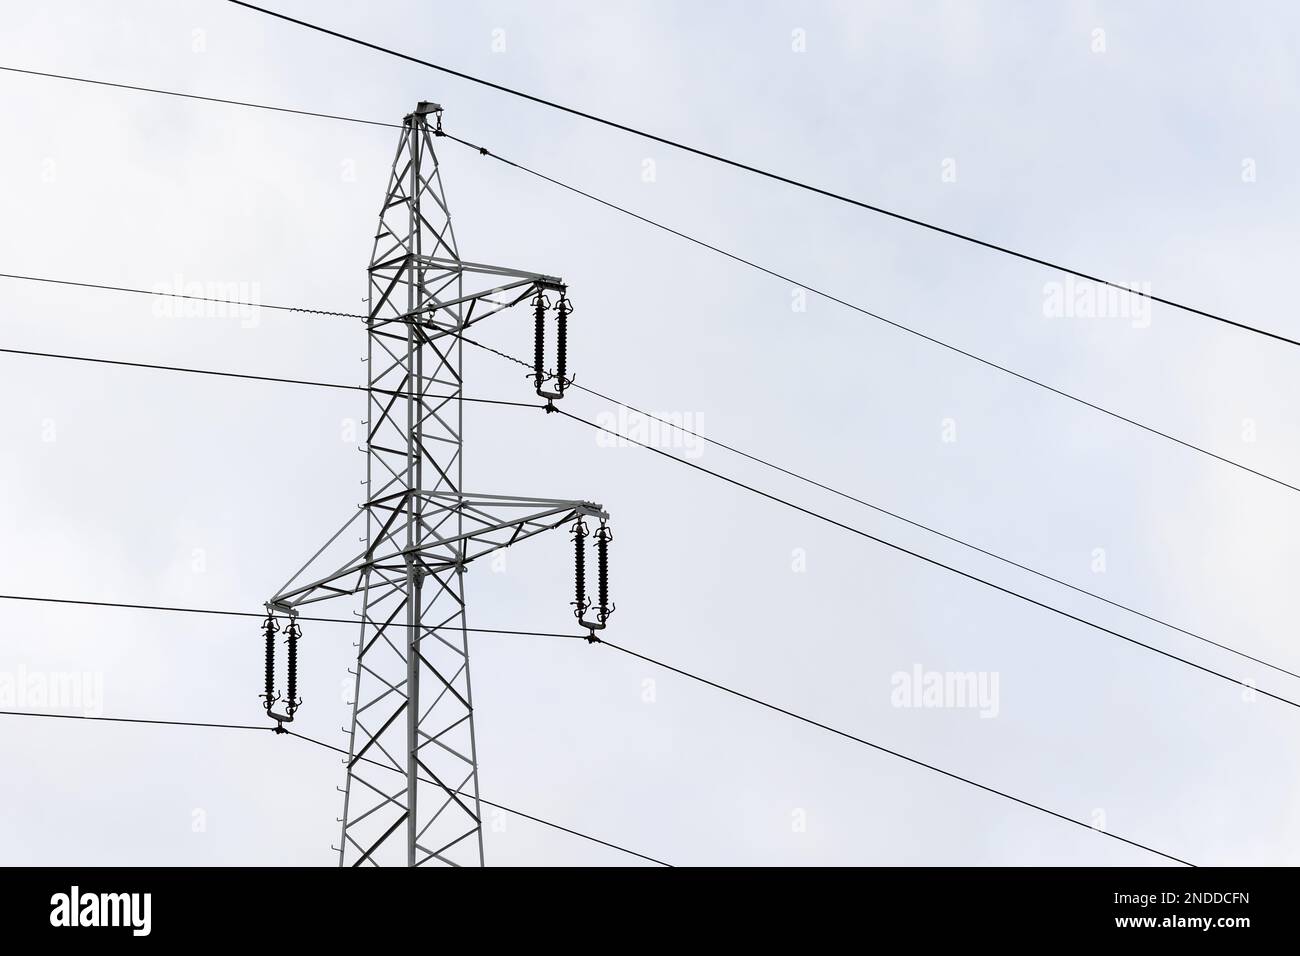 The silhouette of a high-voltage pylon against a completely cloudy sky. Development of high-voltage transmission networks Stock Photo